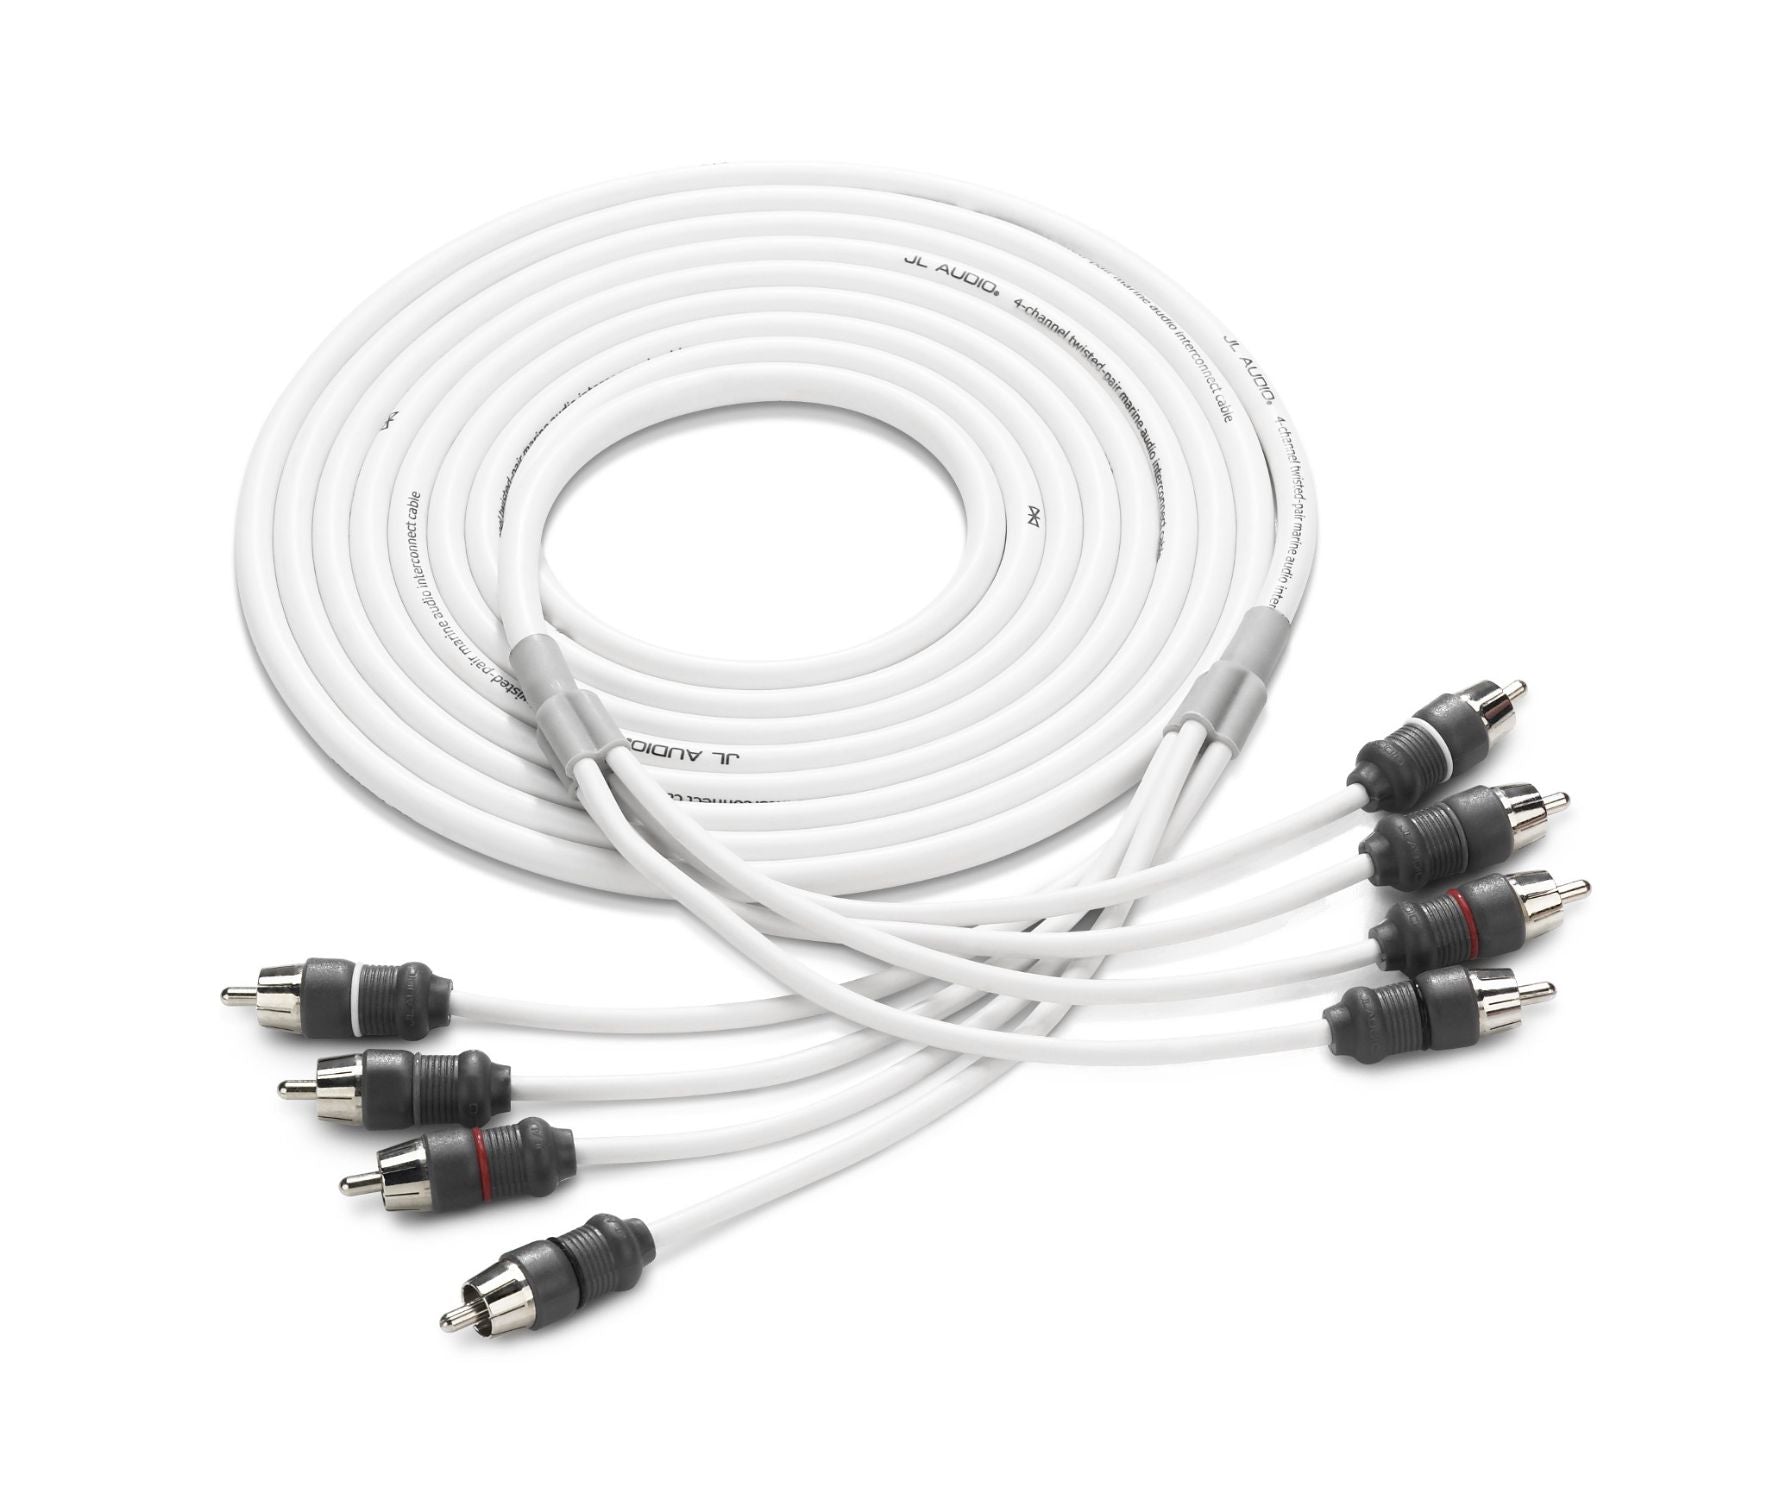 XMD-WHTAIC4-12 White Audio Interconnect, Coiled